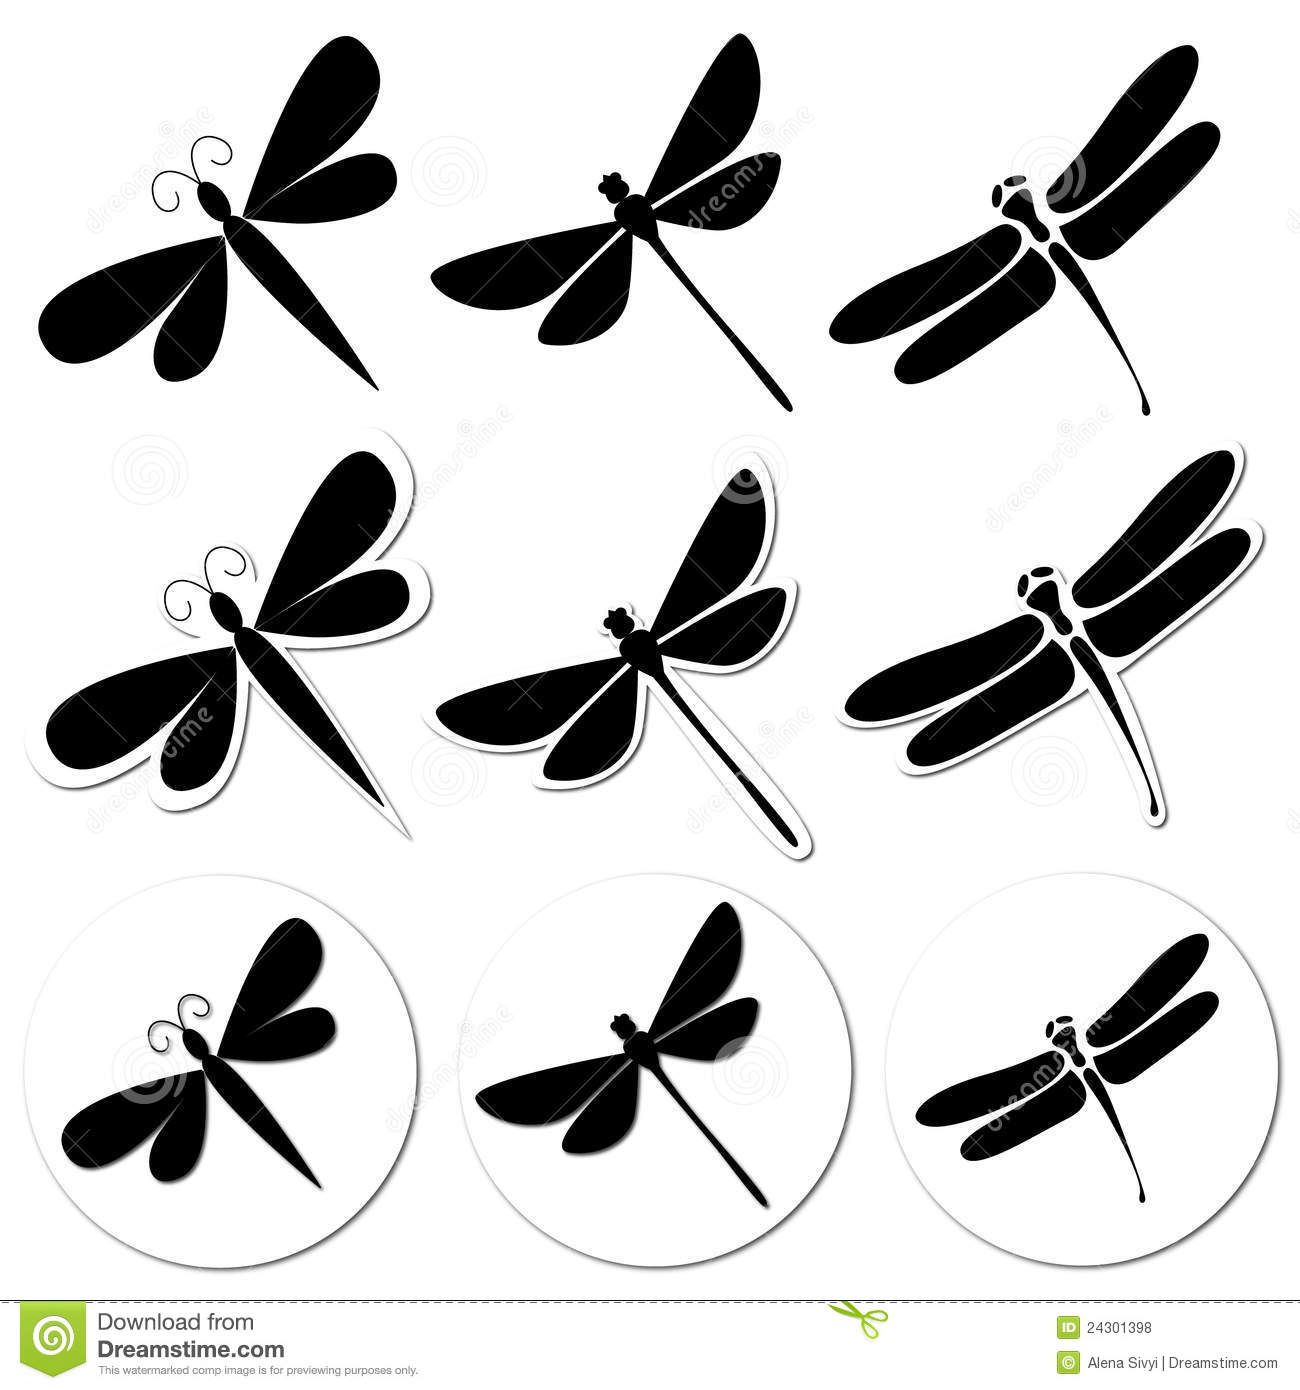 Dragonfly clipart shape. Middle wing tattoos drawing